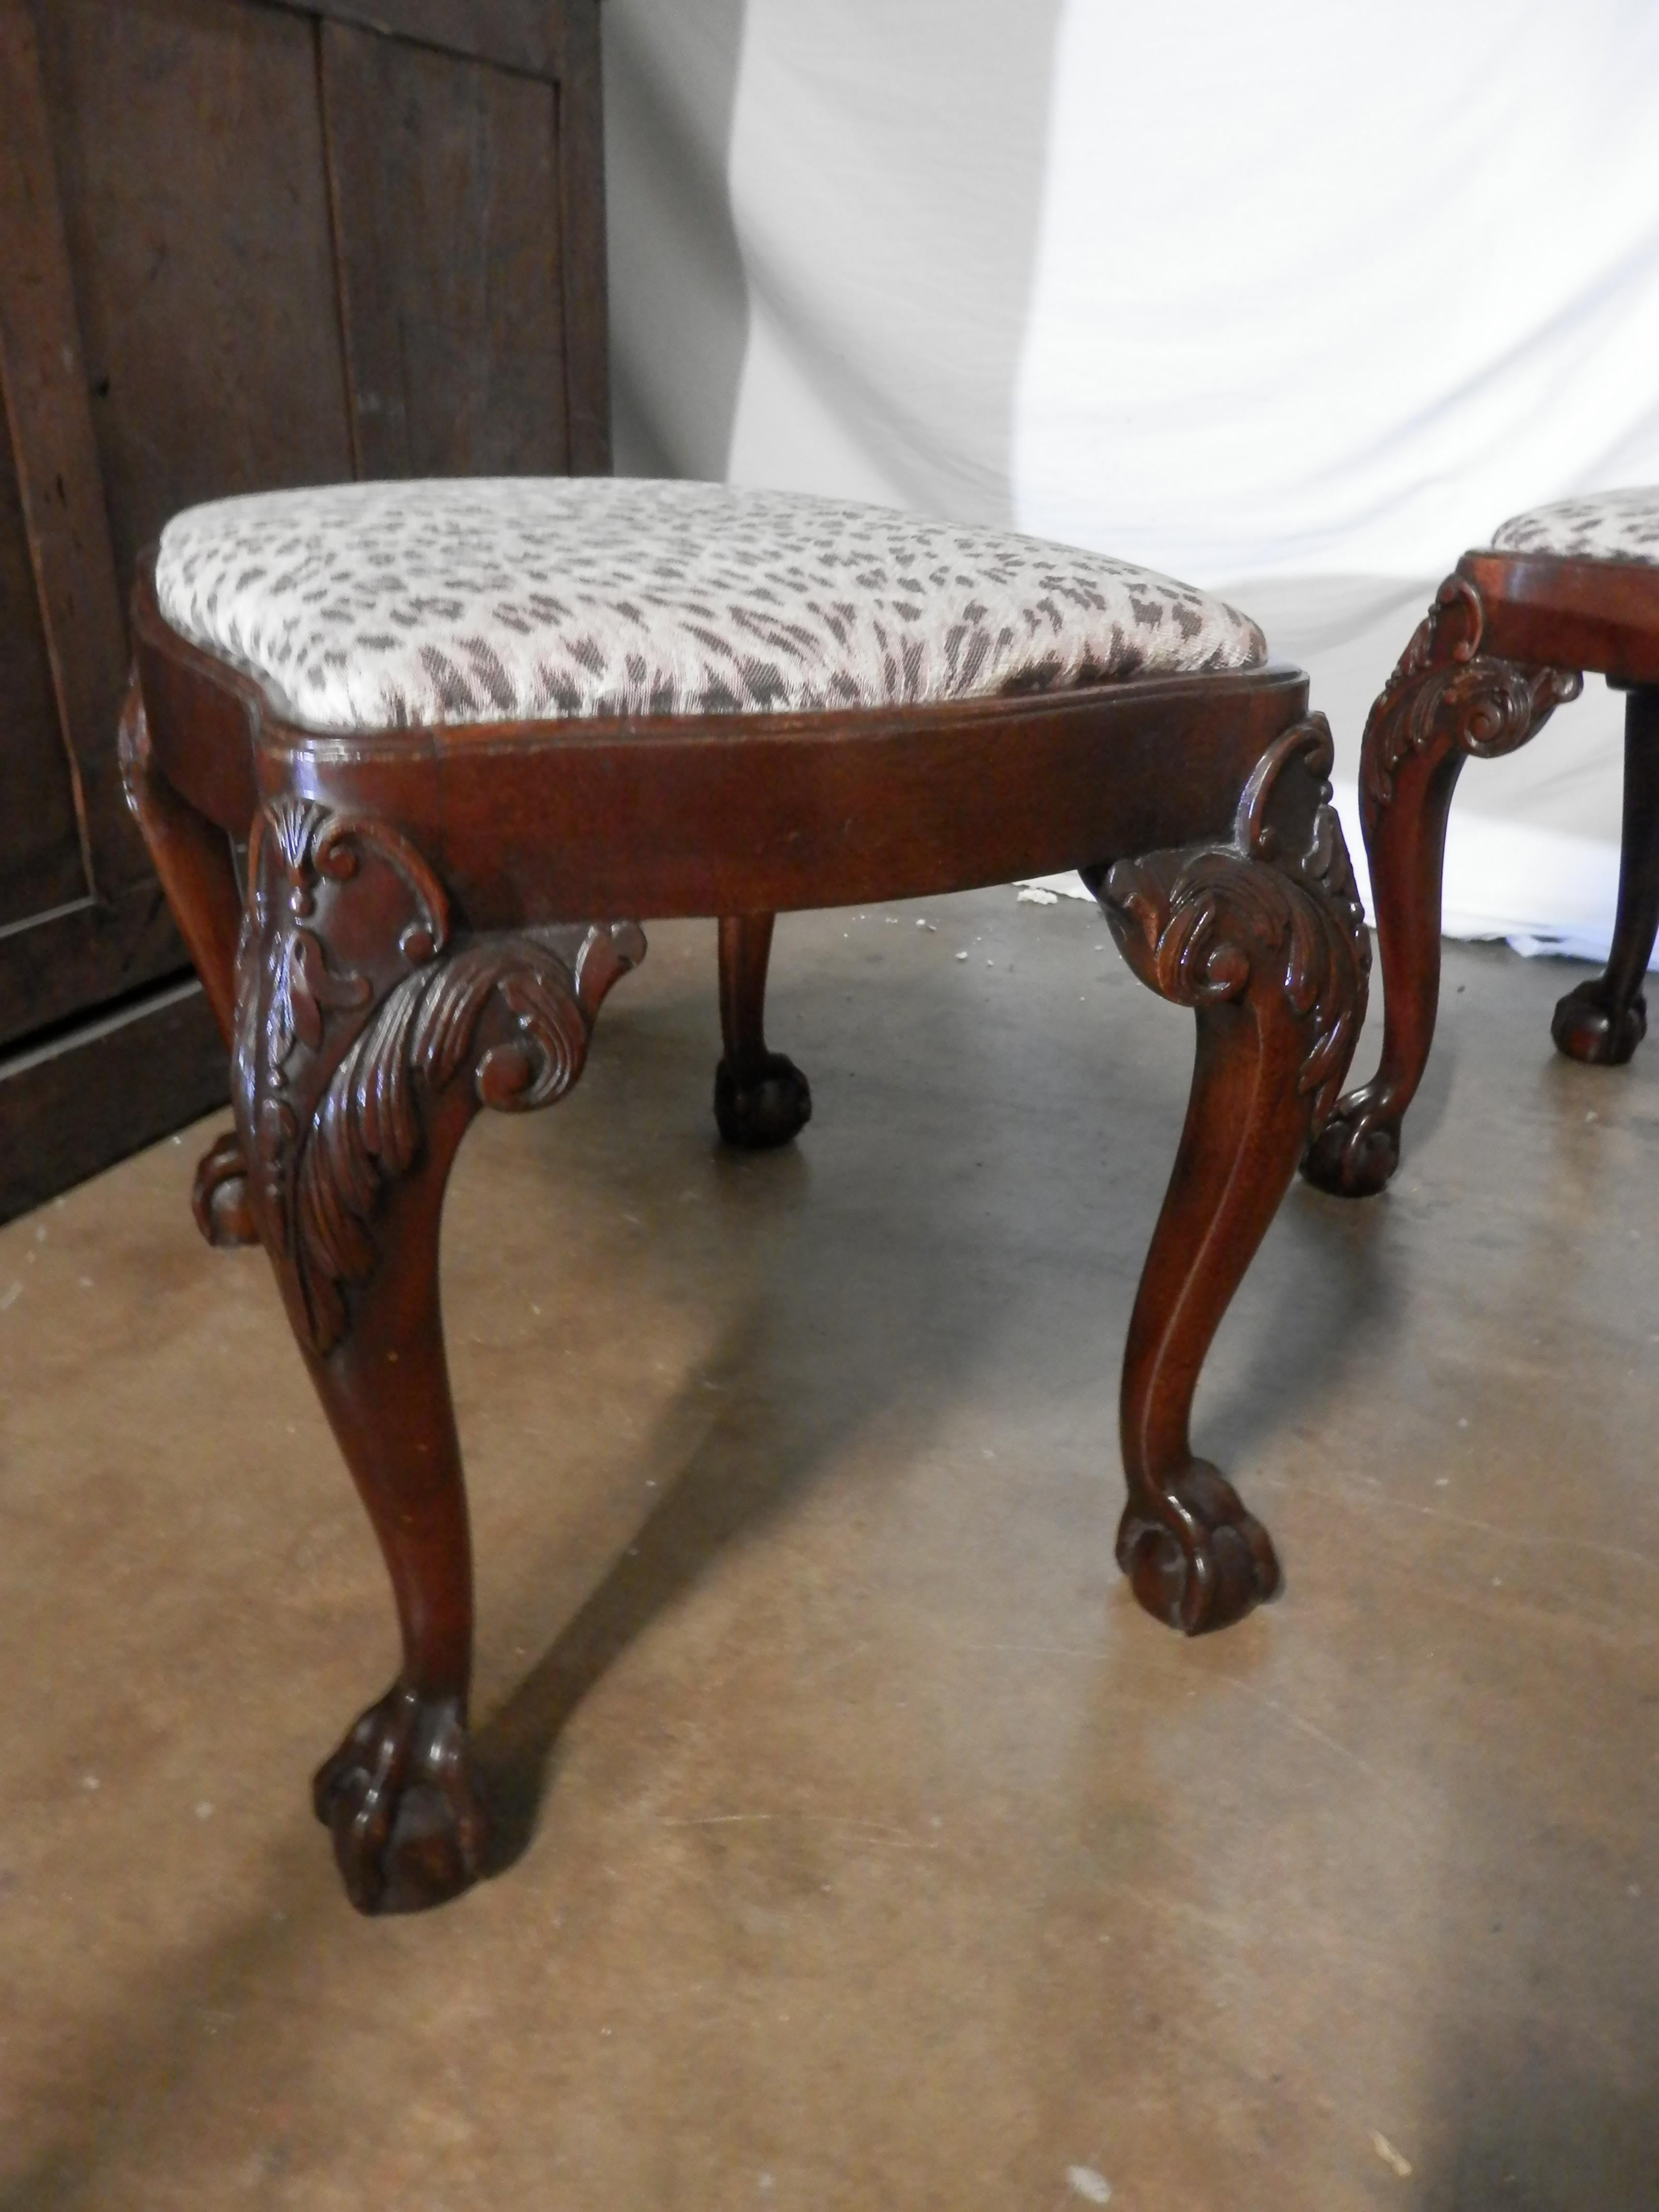 A pair of late 19th century English Chippendale mahogany stools covered in an animal print. Nicely carved acanthus knees ending in ball and claw feet